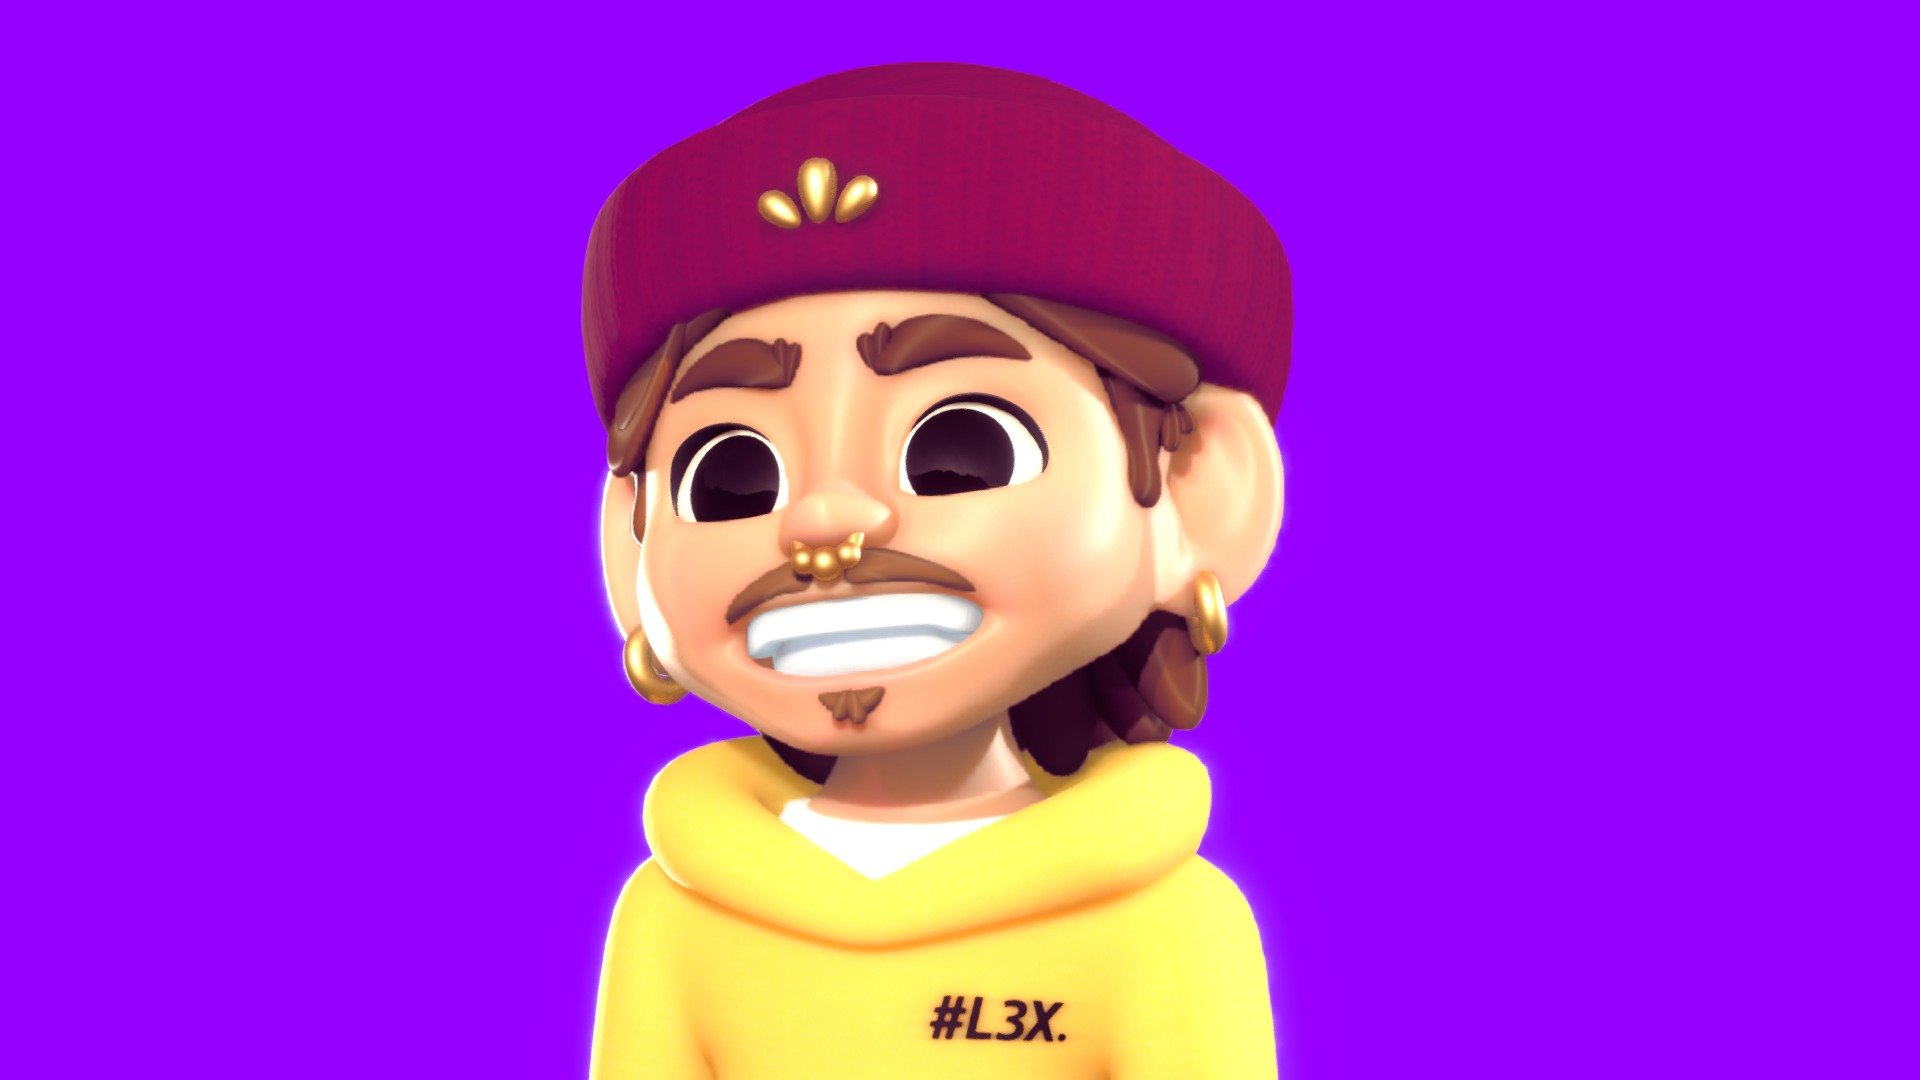 Here's my new profile avatar! The last one was getting old :D 

I made the model in 3Ds Max and the texture in Substance Painter.

I'm also taking commissions so don't hesitate to contact me! - Me! (Profile Avatar) - 3D model by L3X 3d model